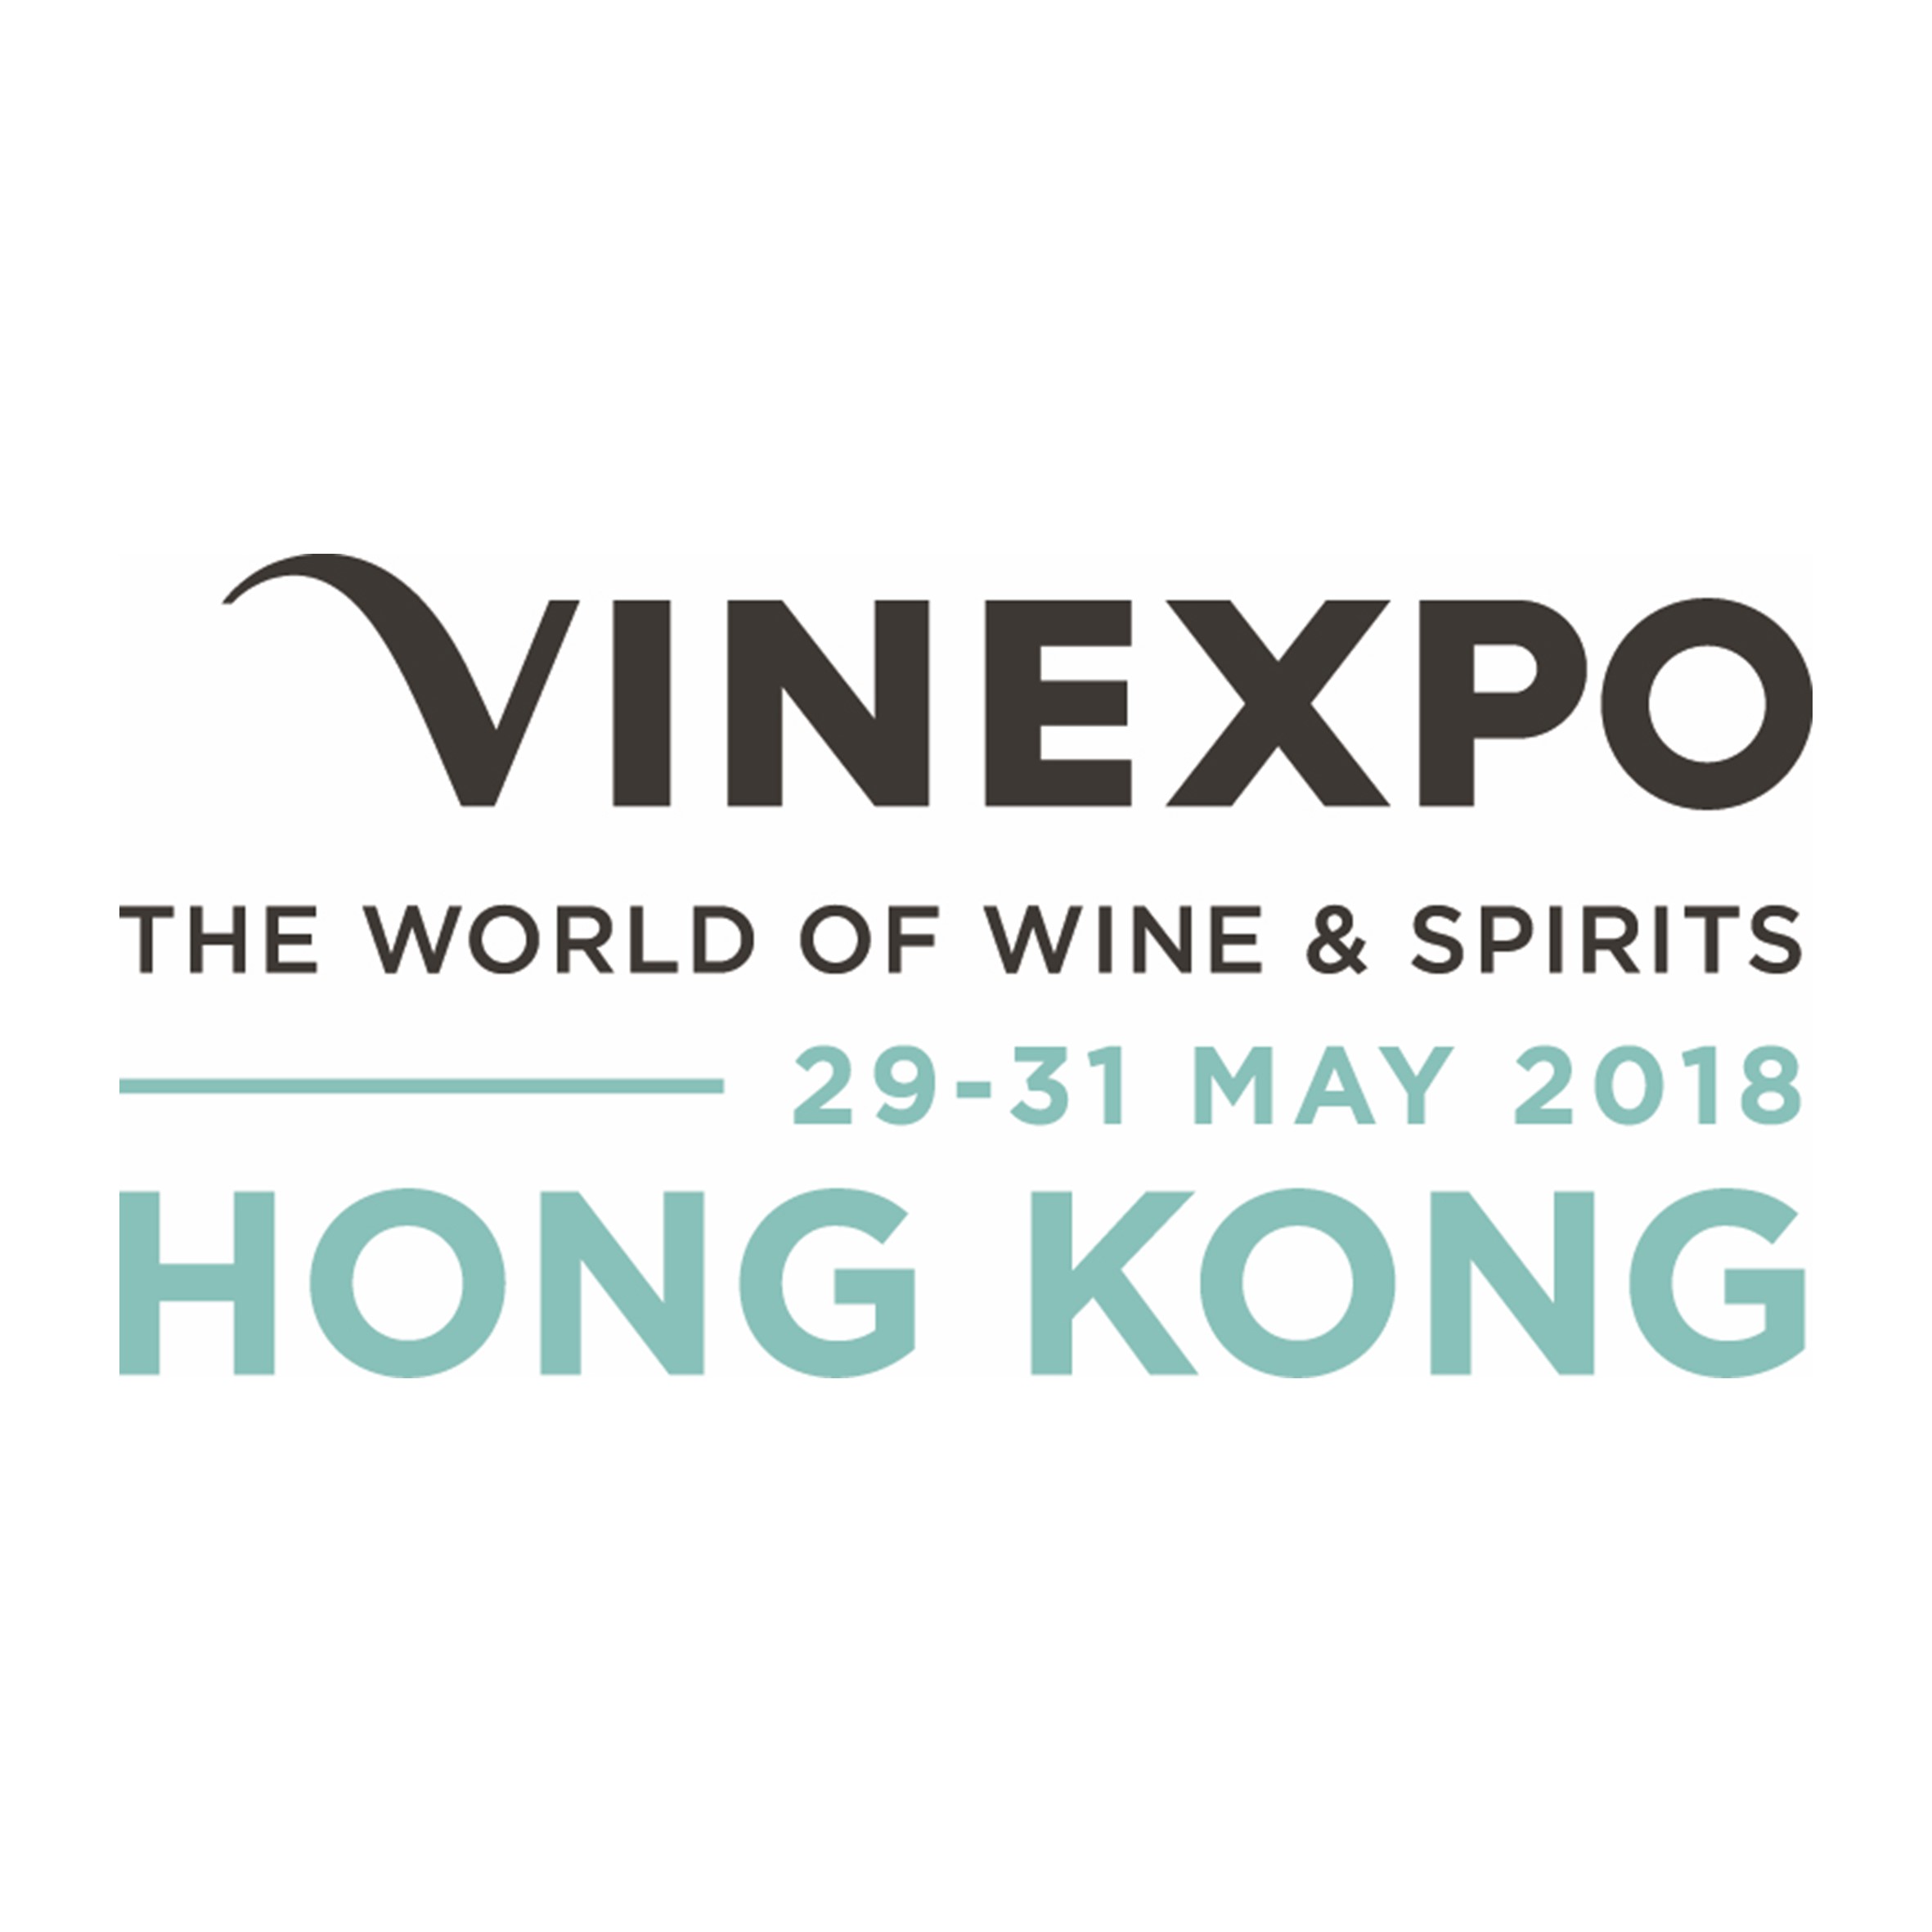 Vinexpo Hong Kong Logo 2018 - What is marketing for anyway?